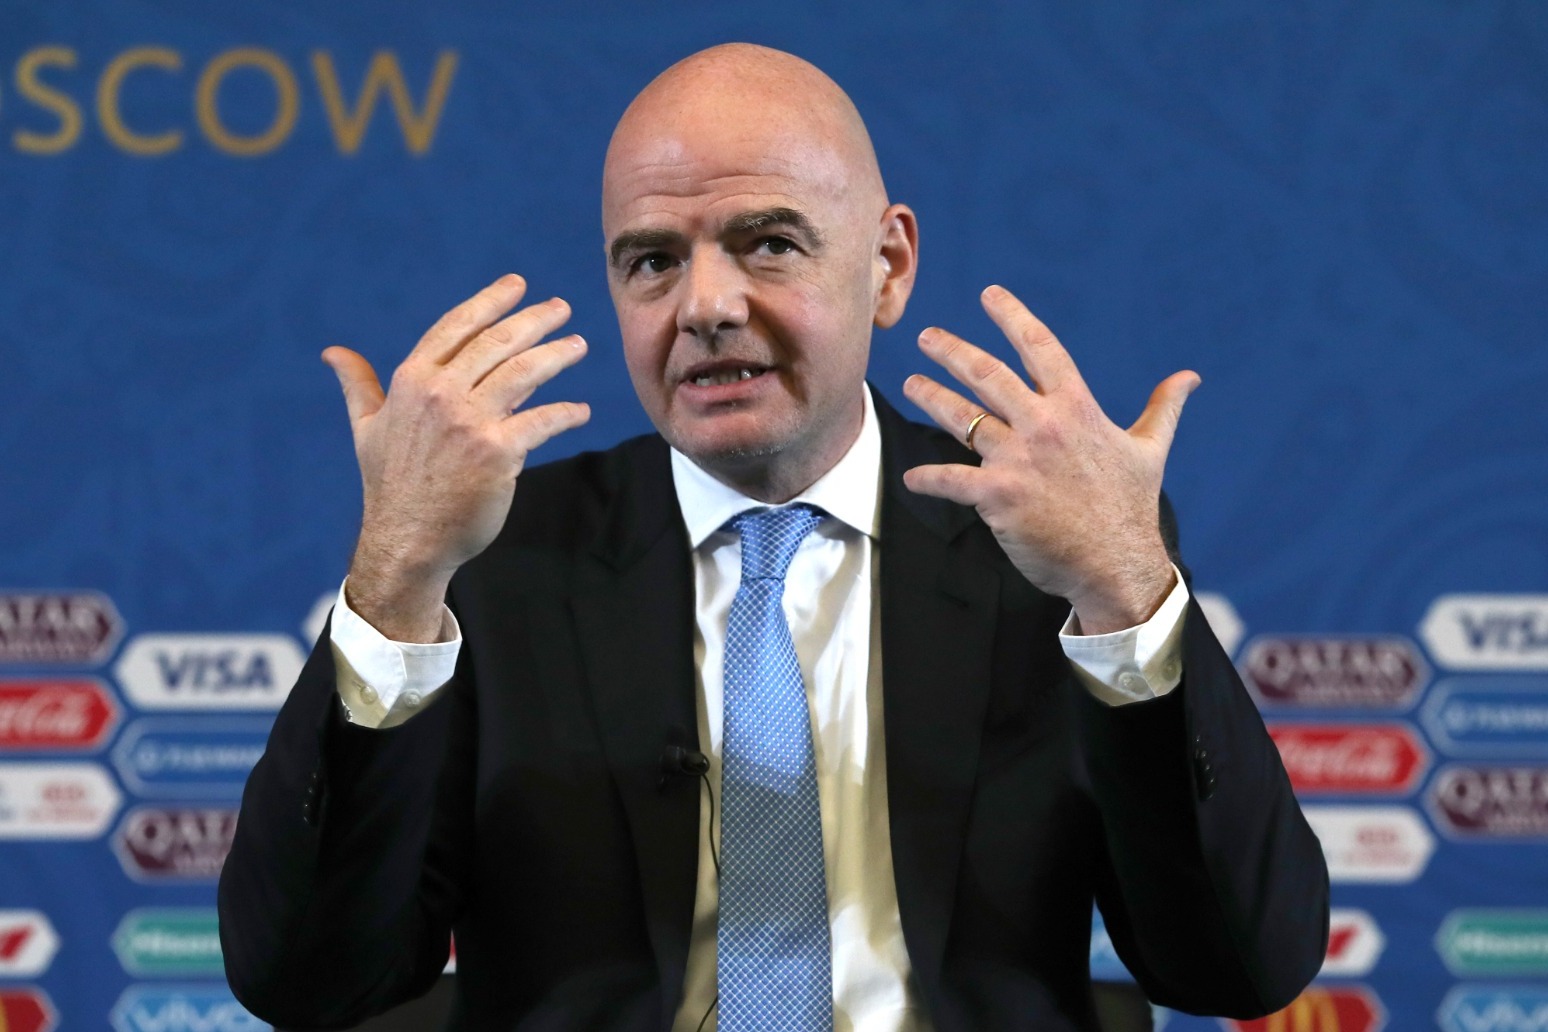 Gianni Infantino’s remark on African migrants labelled ‘completely unacceptable’ 